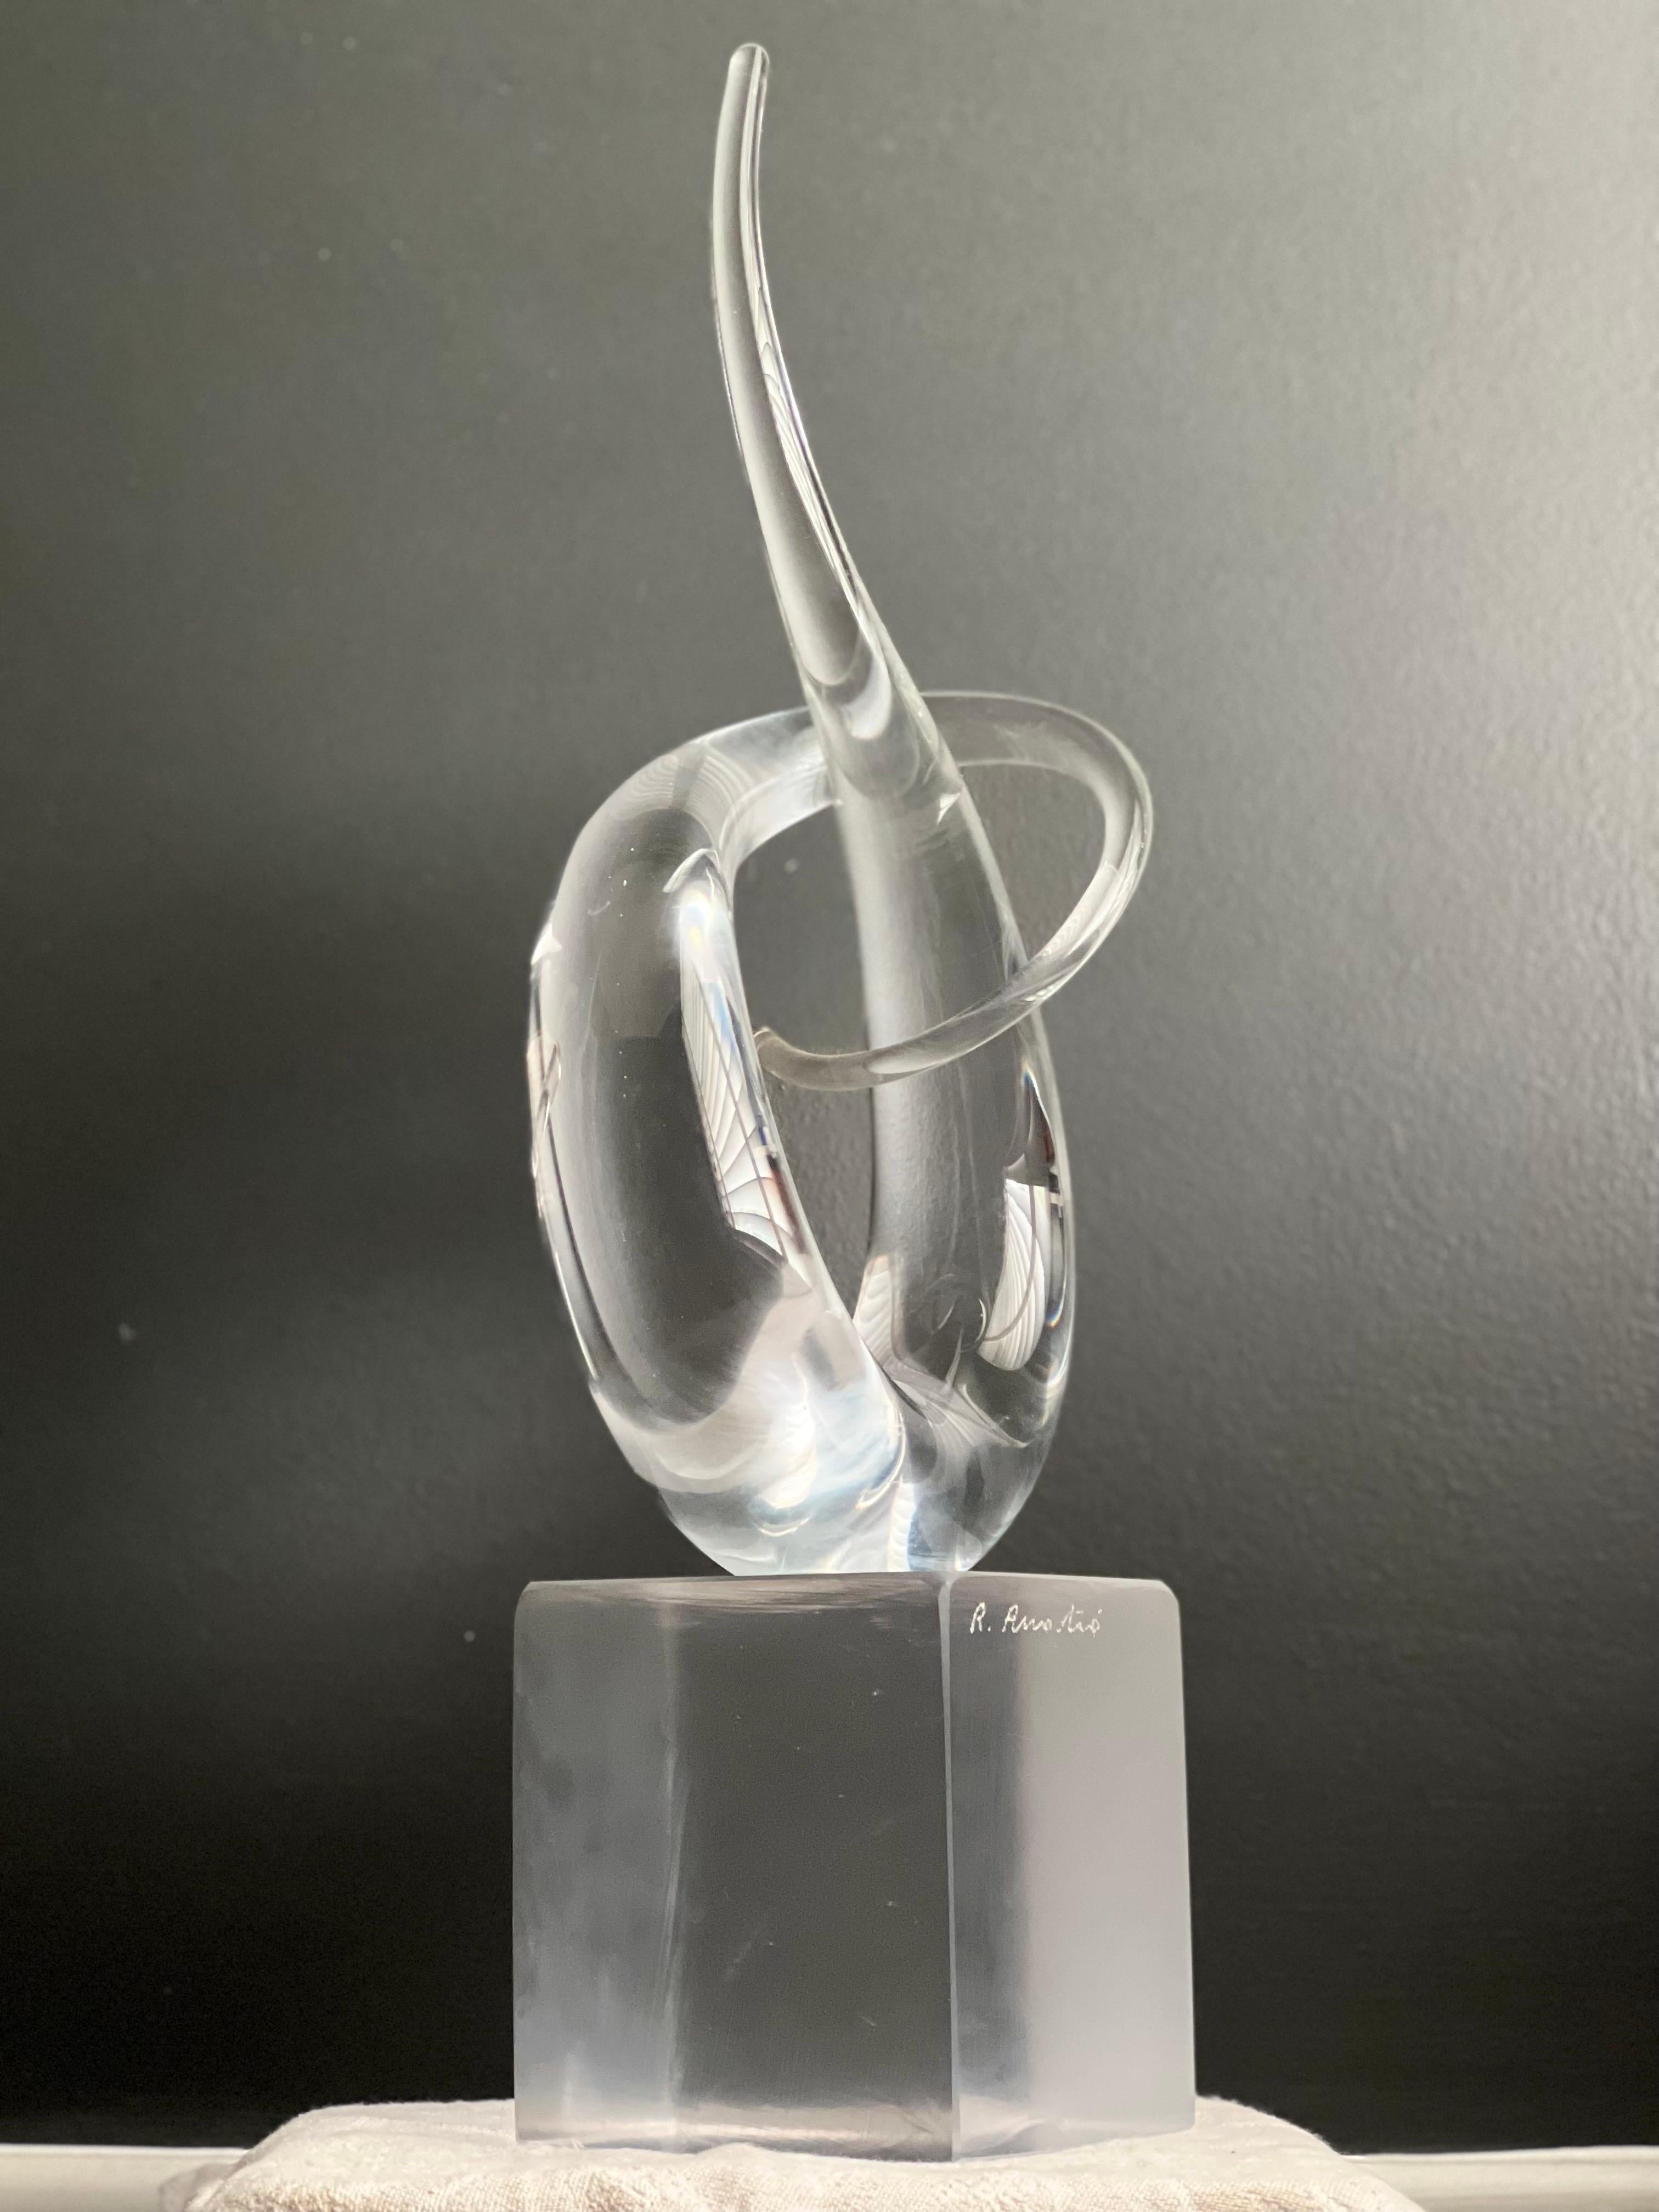 Post-Modern 'Love Knot' Murano Sculpture by Renato Anatrà, Signed, Italy, 1980's For Sale